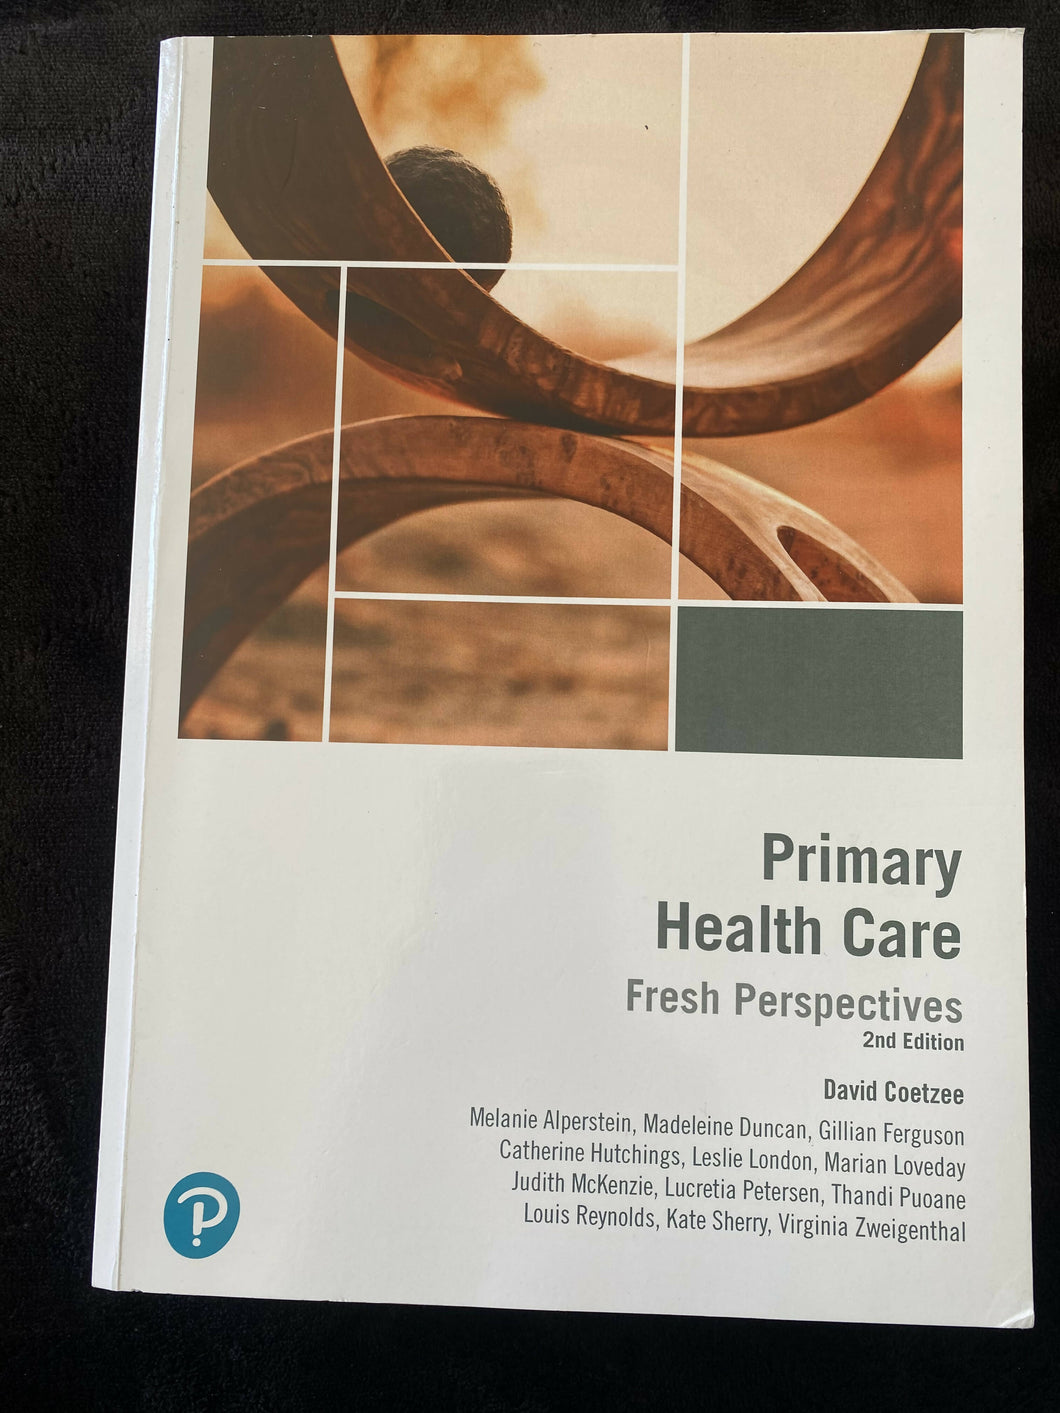 Primary Health Care. Fresh Perspectives 2nd Edition.